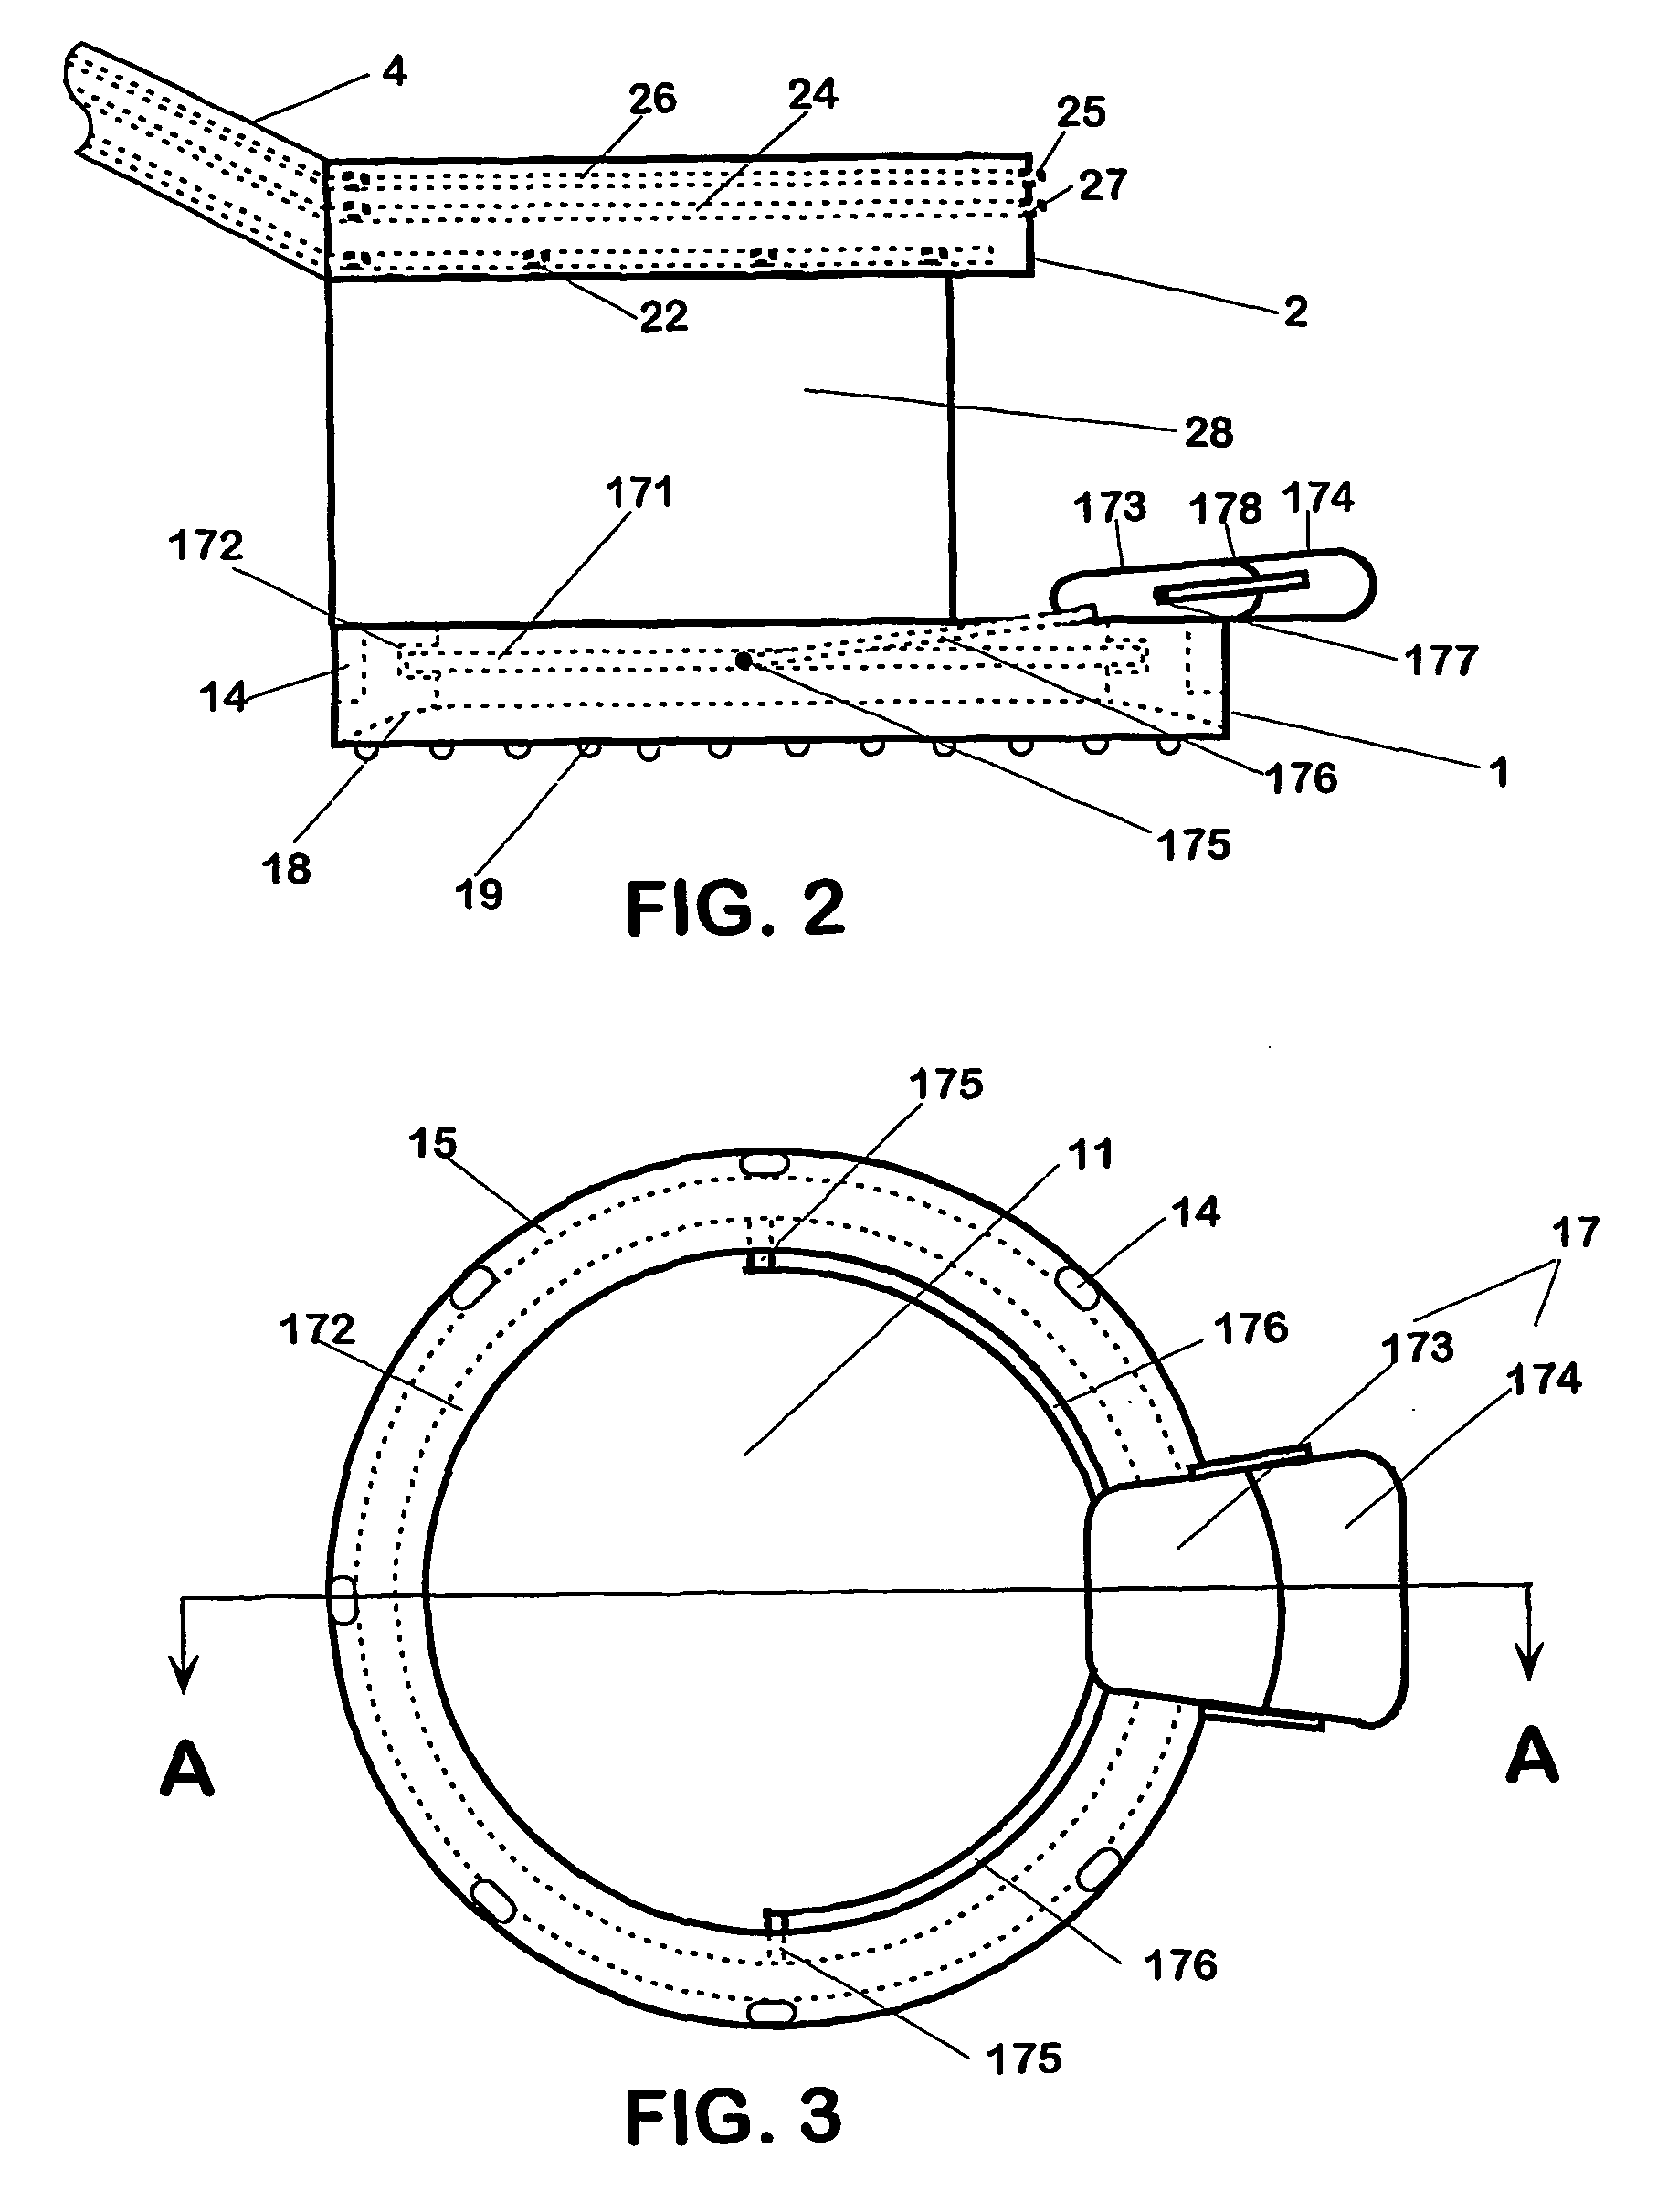 Multi-function surgical instrument for facilitating opthalmic laser surgery